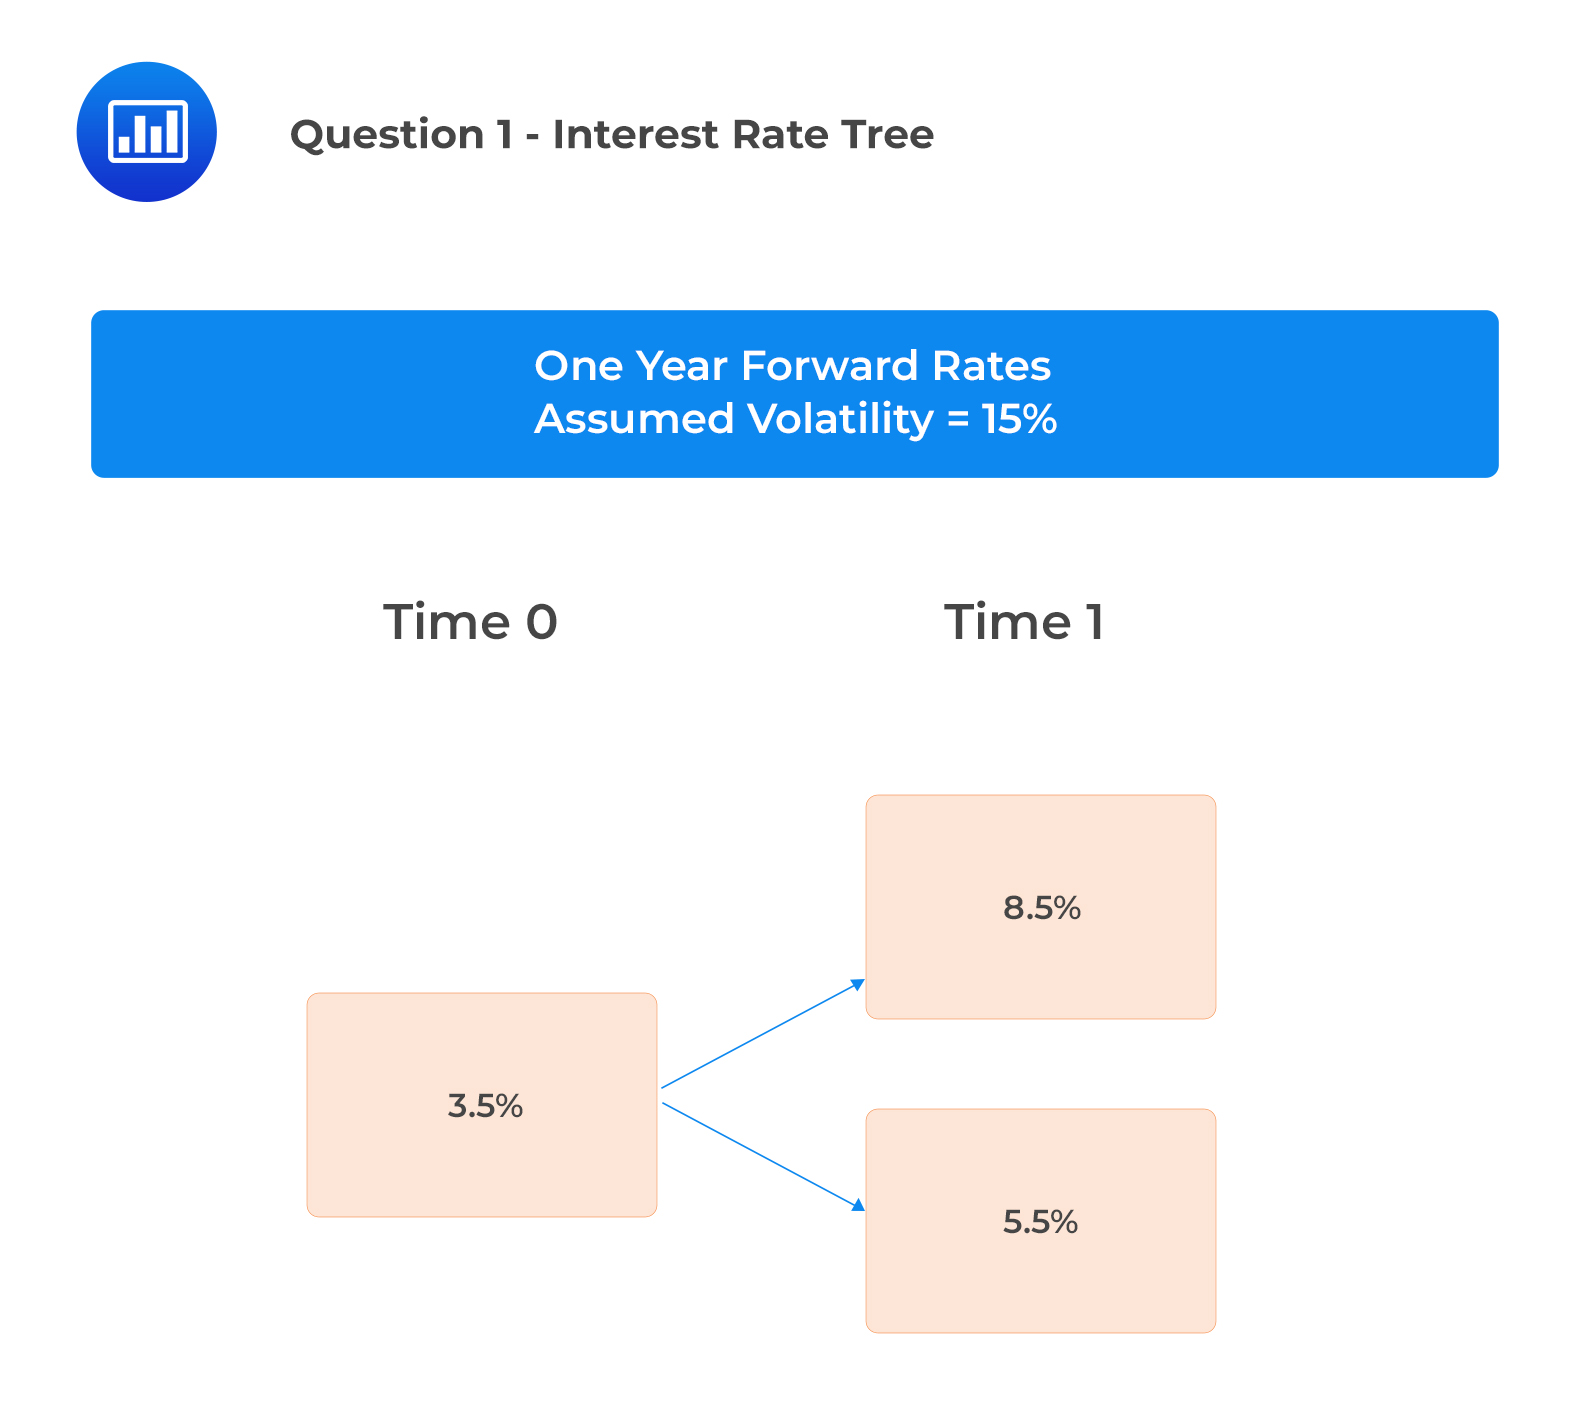 4 - Question 1 - Interest Rate Tree